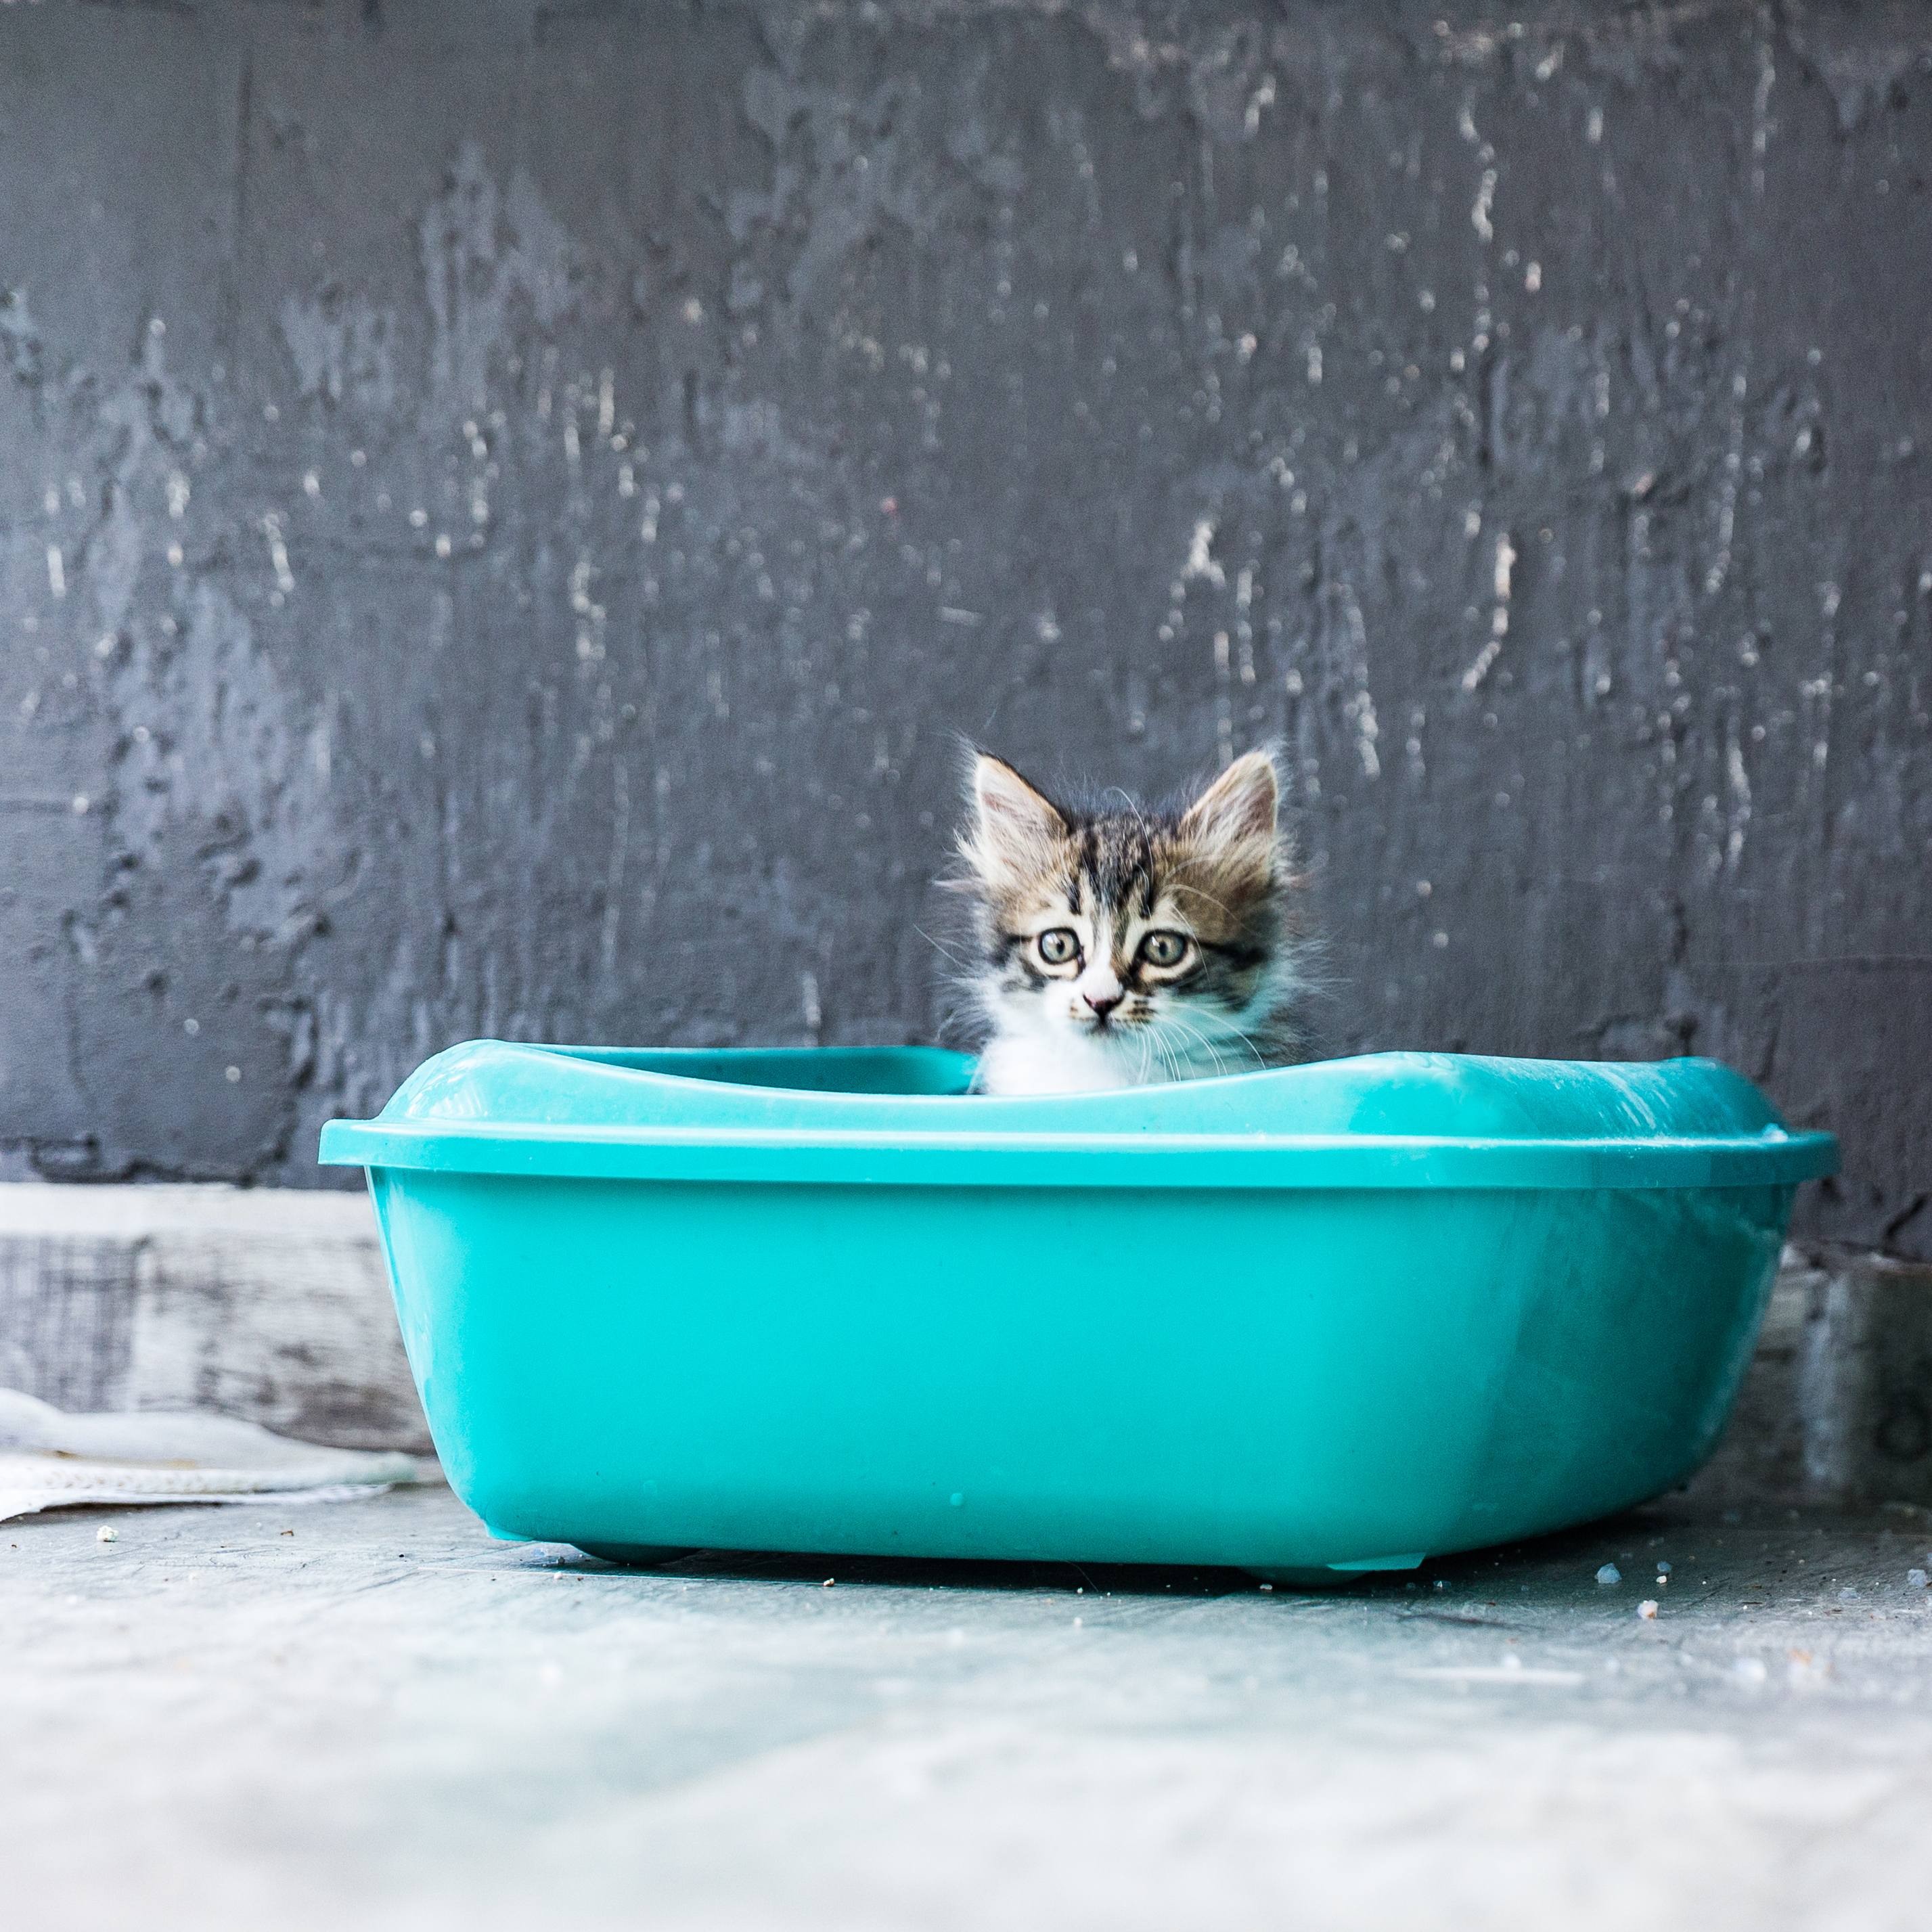 7 Reasons Cats Go Outside the Litter Box